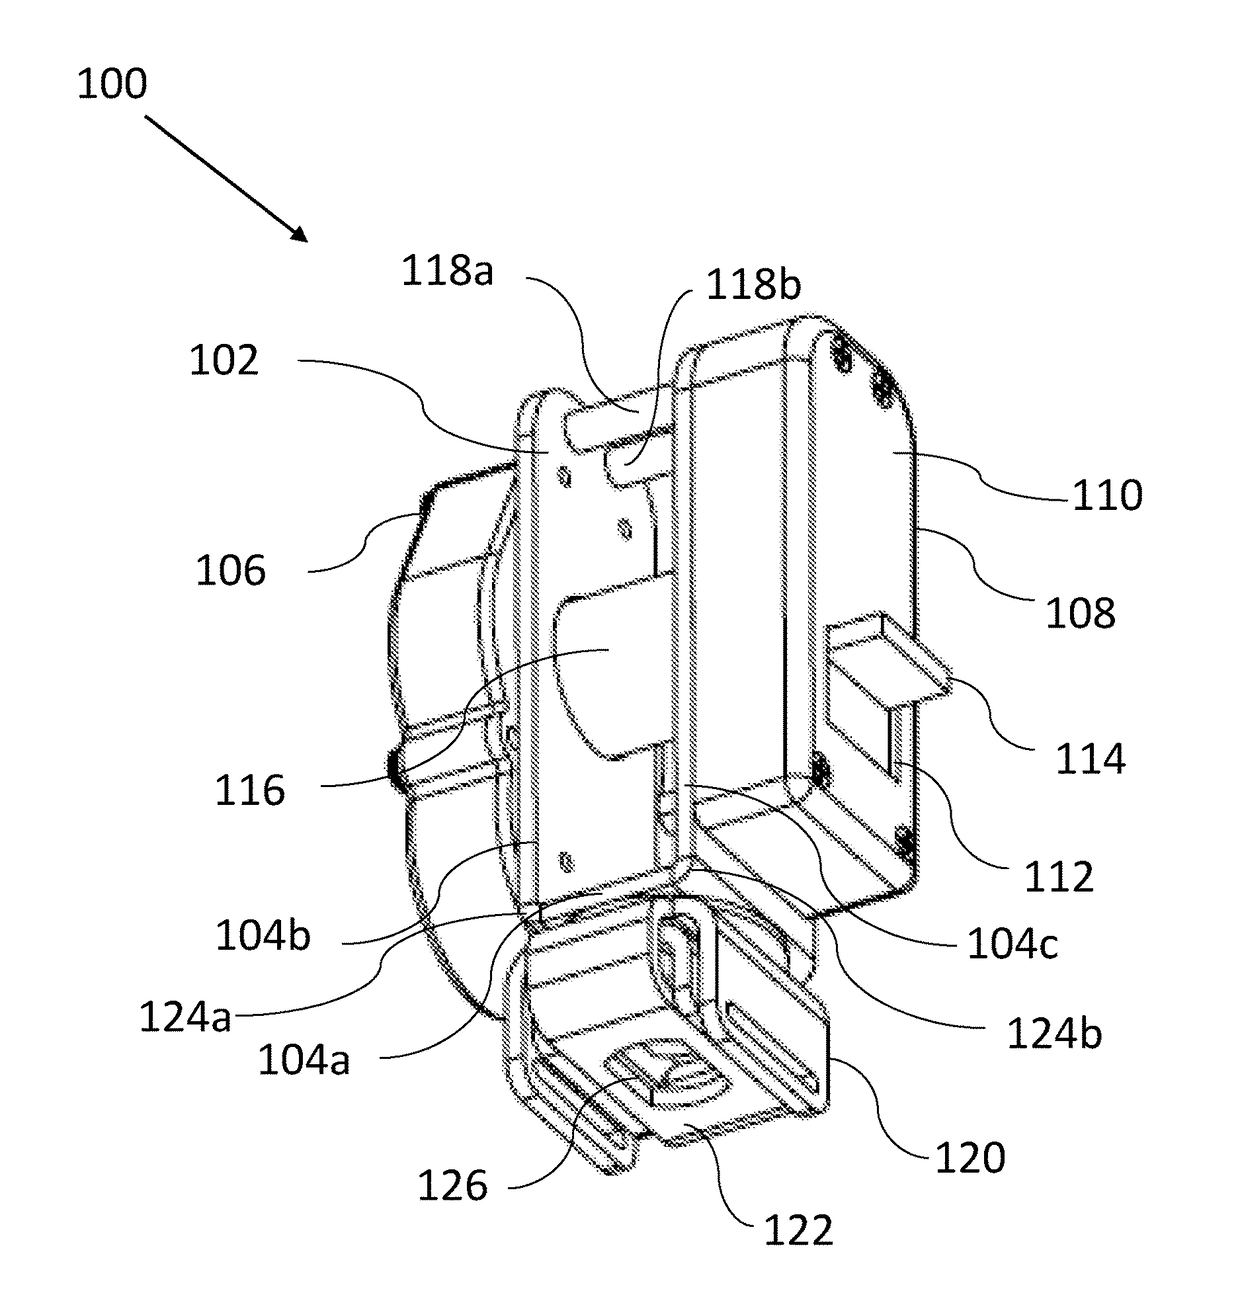 Running-end spool containment device and system